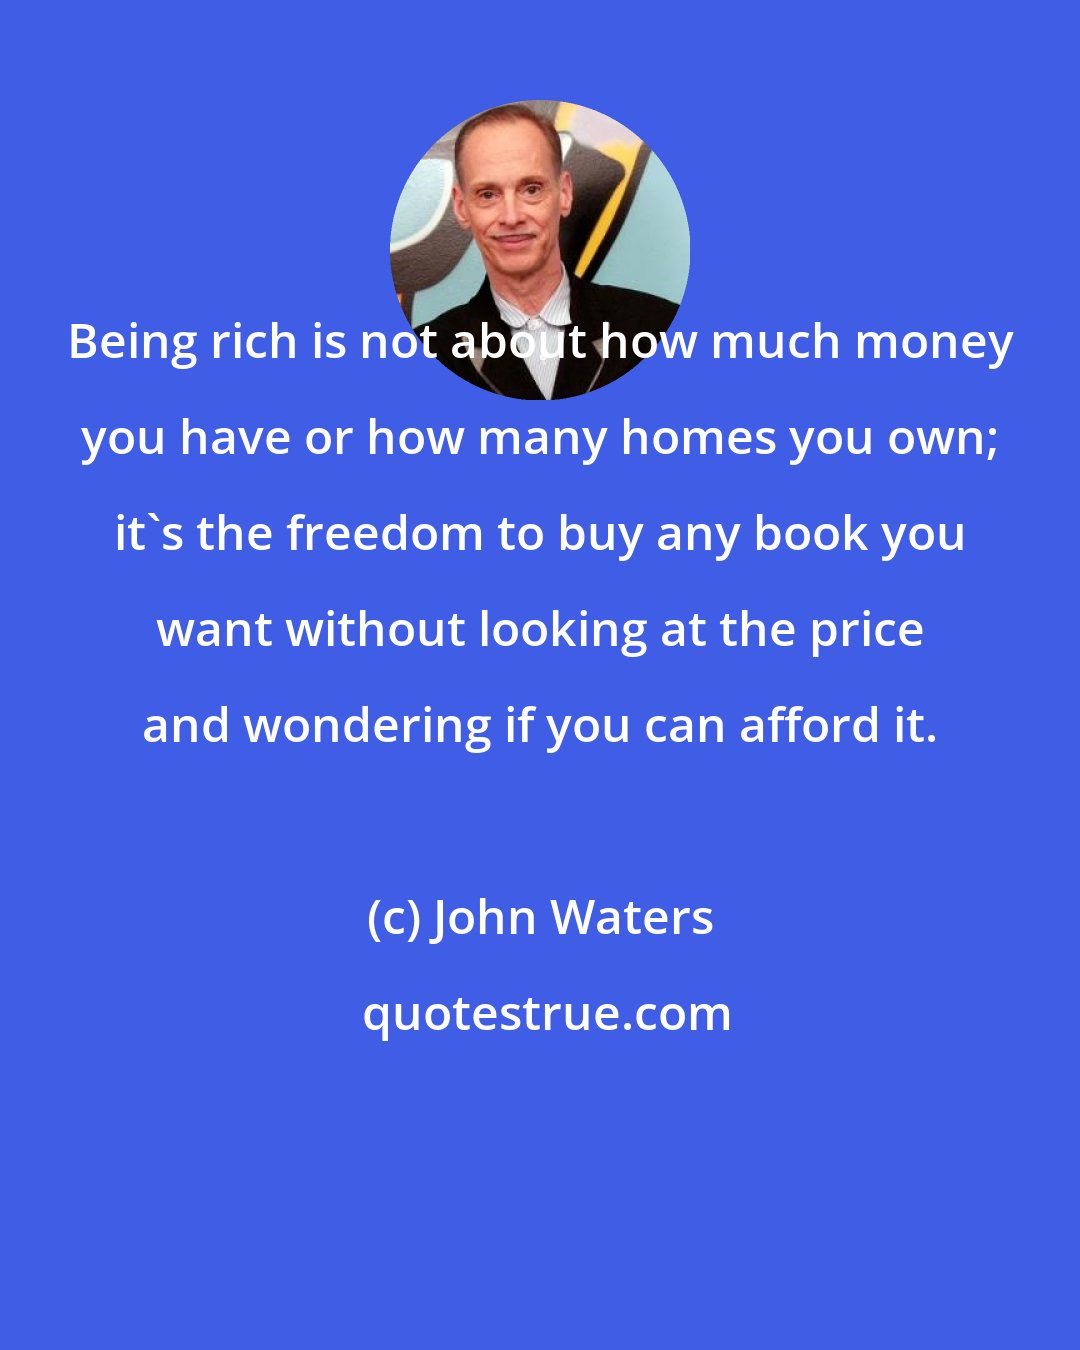 John Waters: Being rich is not about how much money you have or how many homes you own; it's the freedom to buy any book you want without looking at the price and wondering if you can afford it.